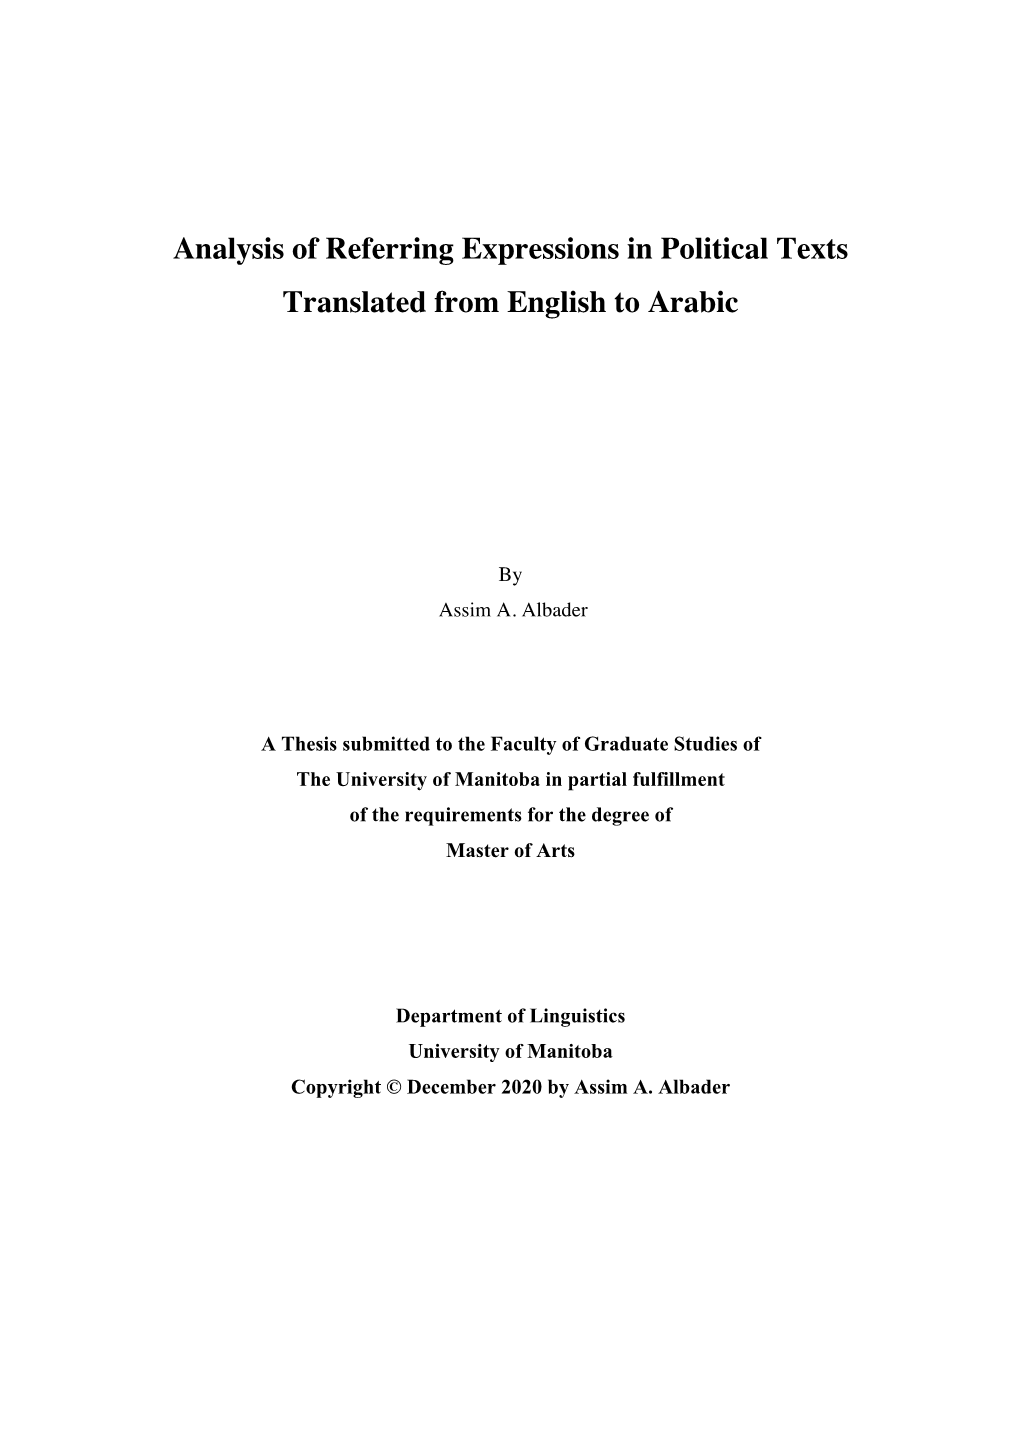 Analysis of Referring Expressions in Political Texts Translated from English to Arabic